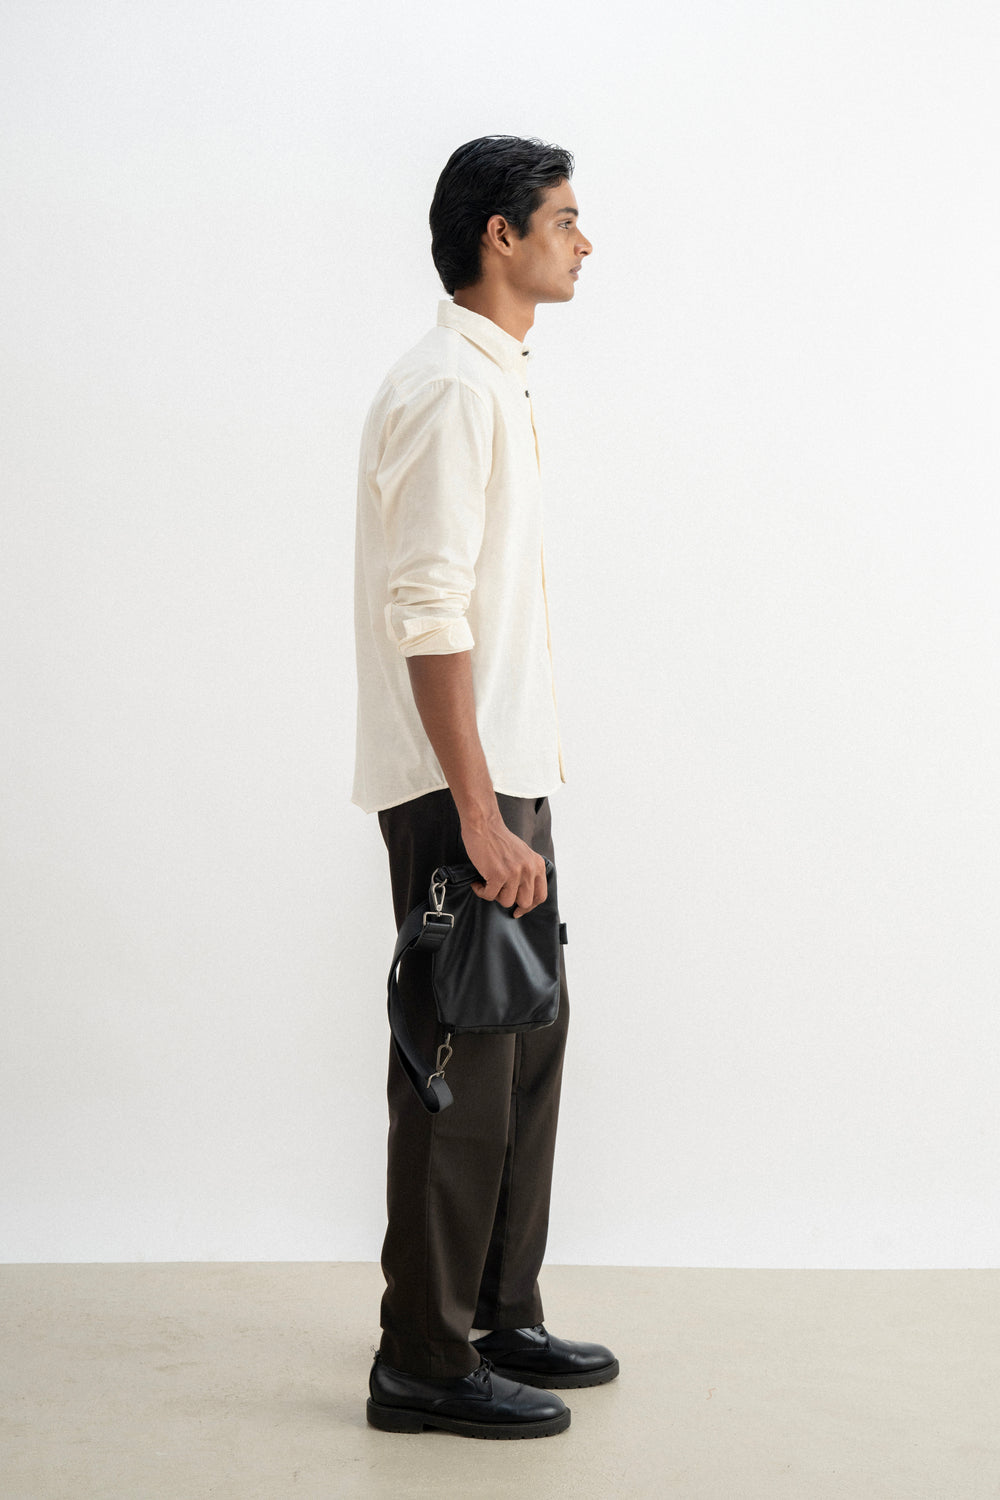 Tanned brown Trousers - Studio